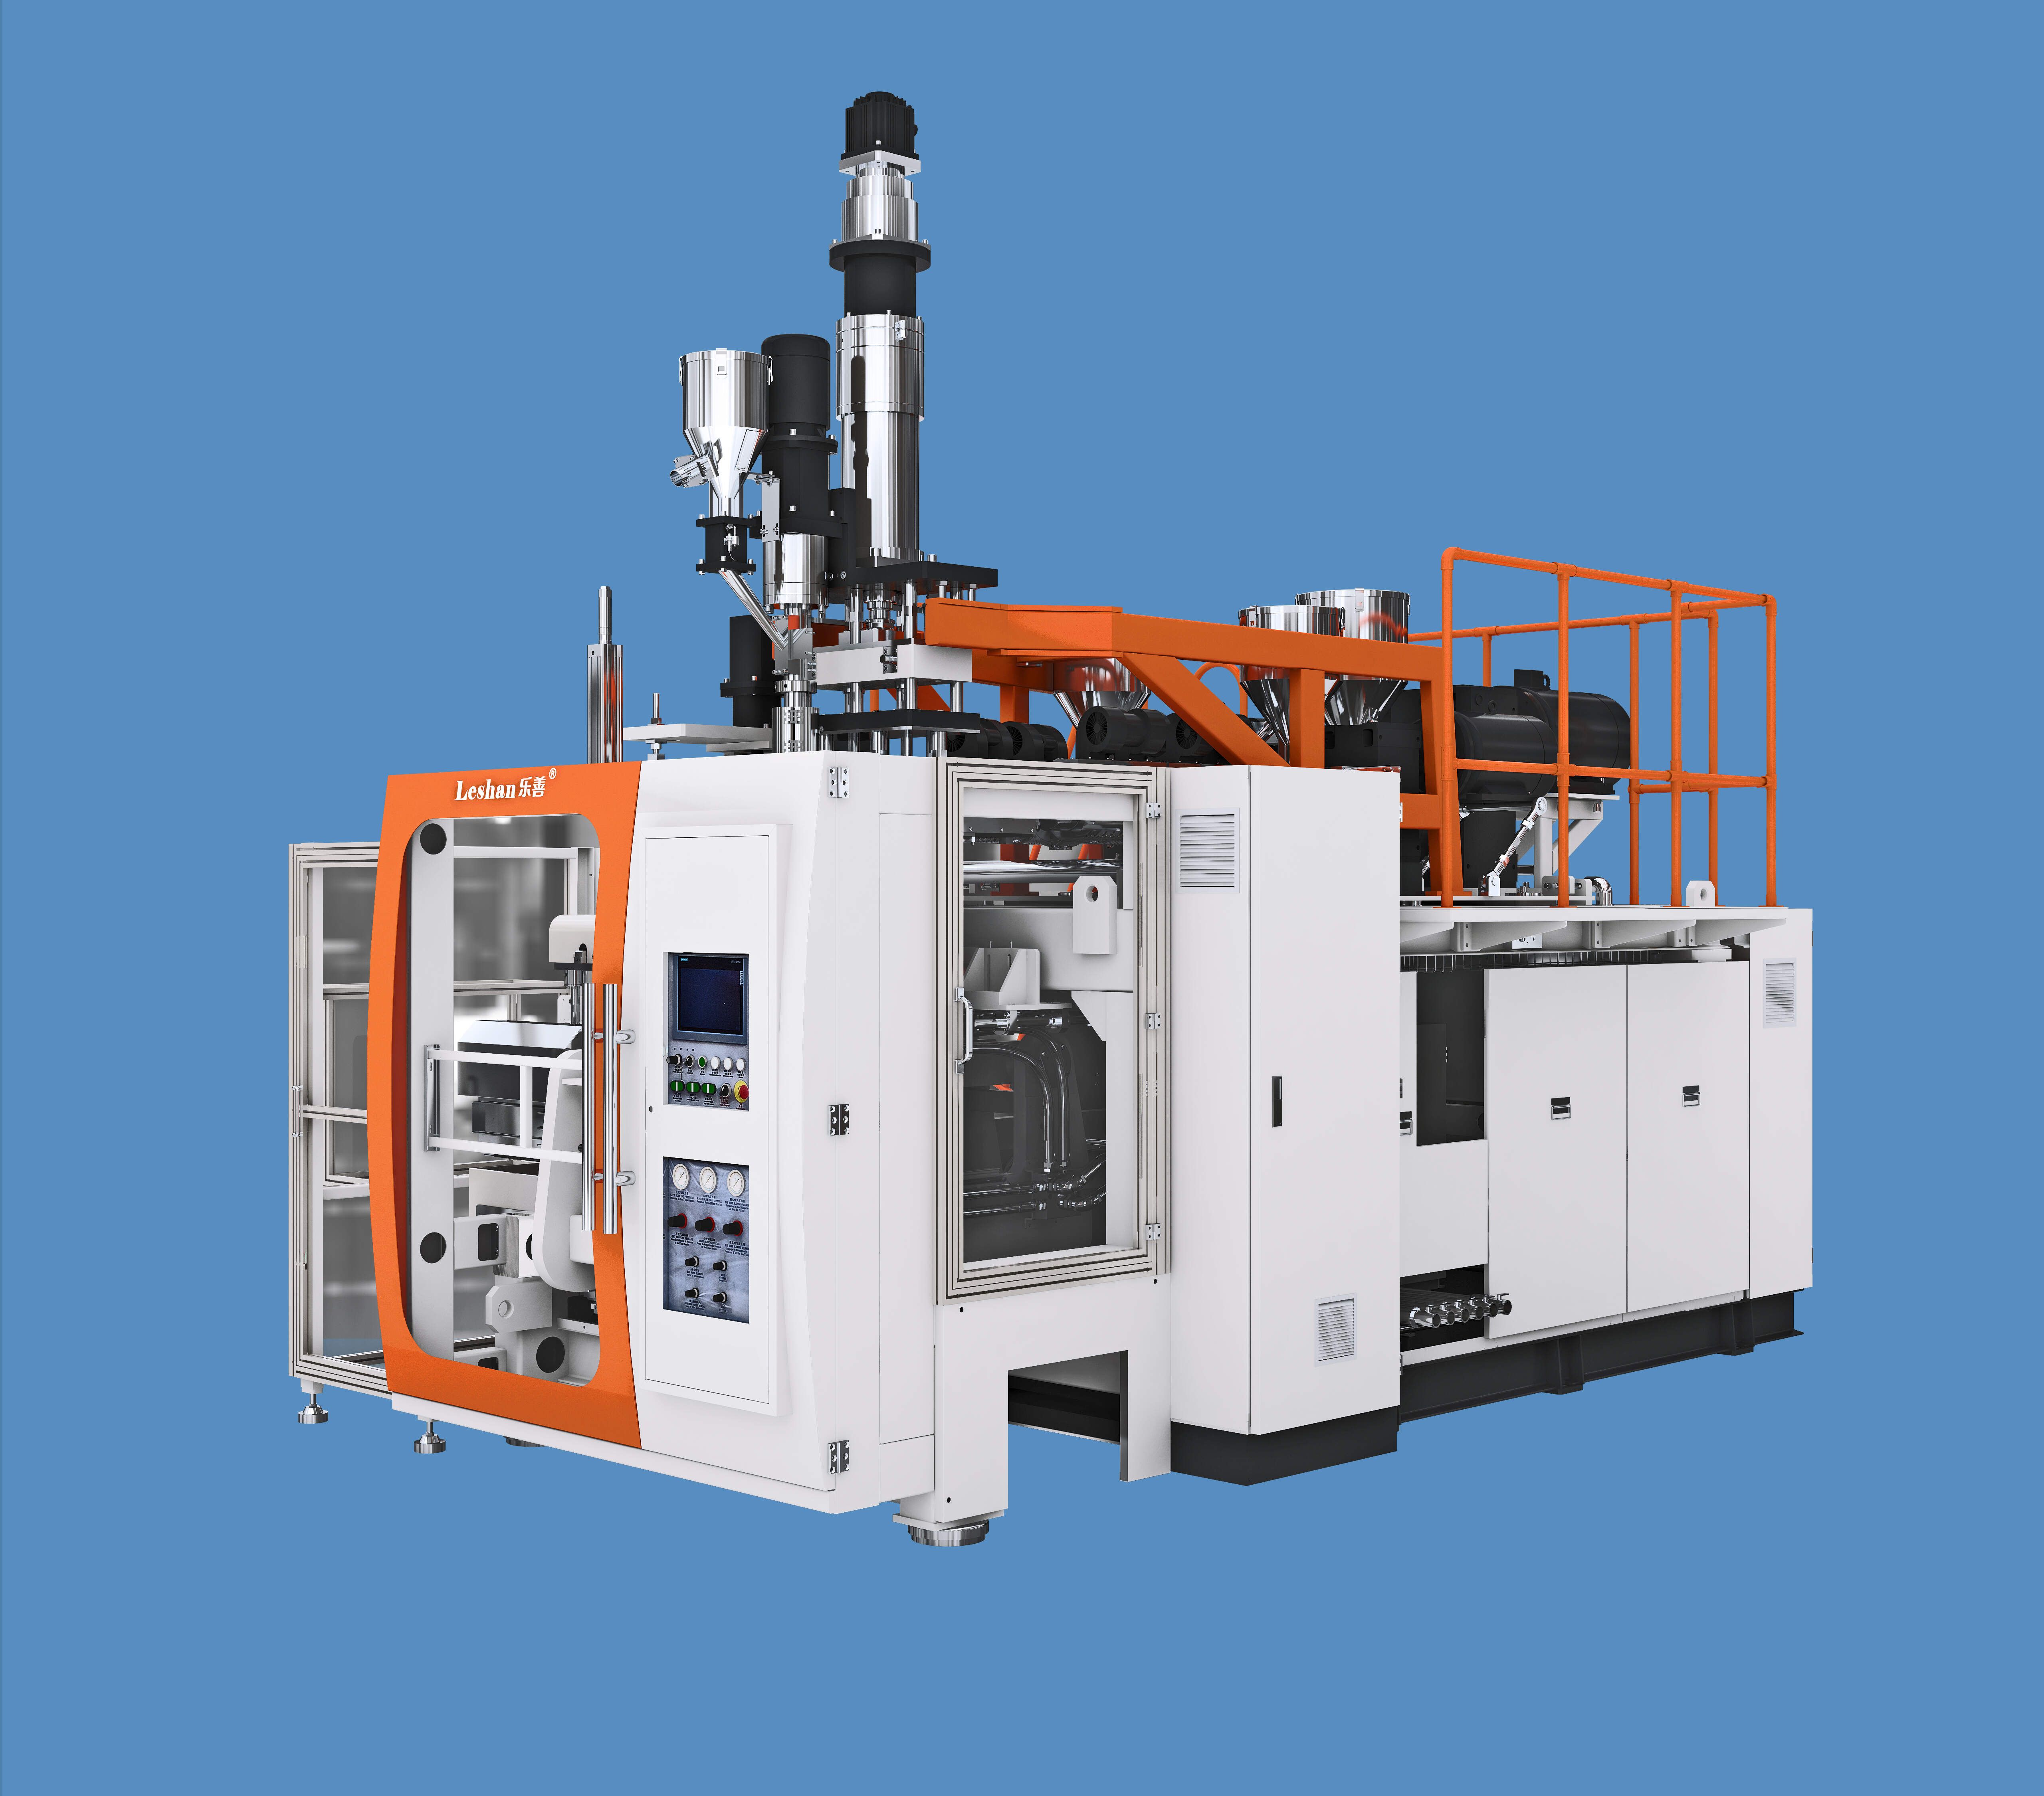 How to choose the mold head of a co extrusion bottle blow molding machine?